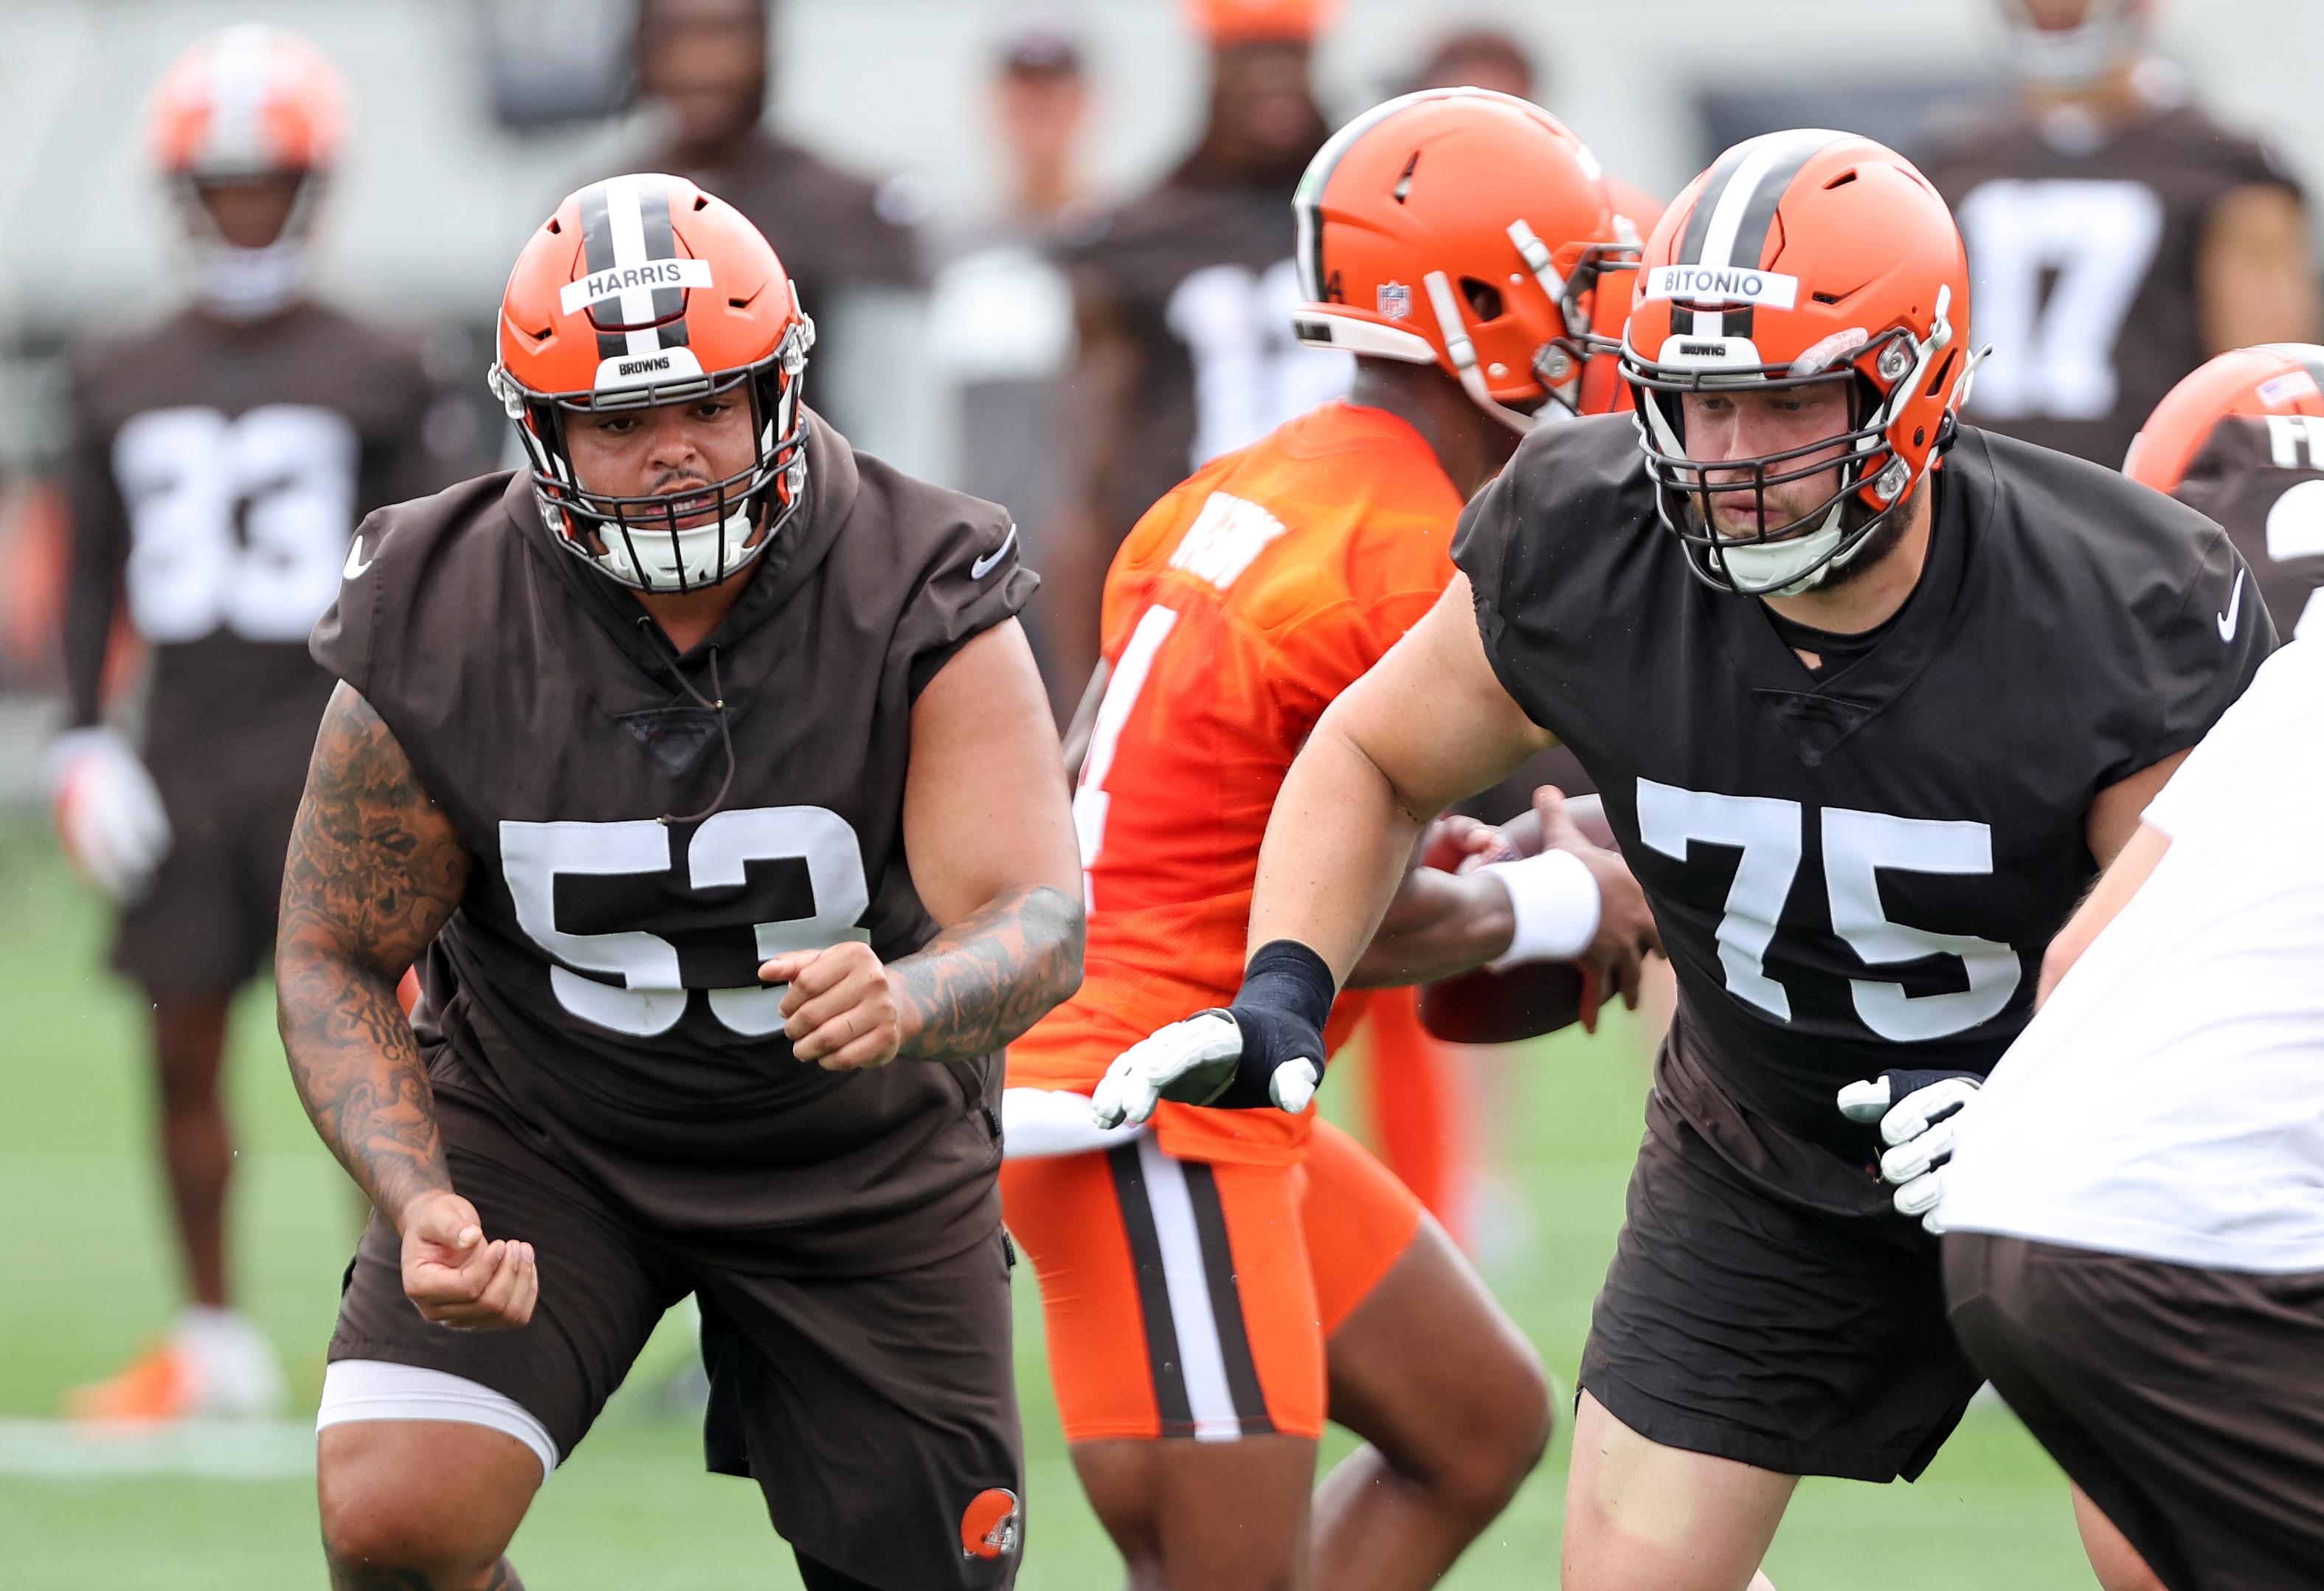 Harrison Bryant suffers a high ankle sprain; Browns long snapper Charley  Hughlett, fullback Johnny Stanton placed on COVID-19 lists 